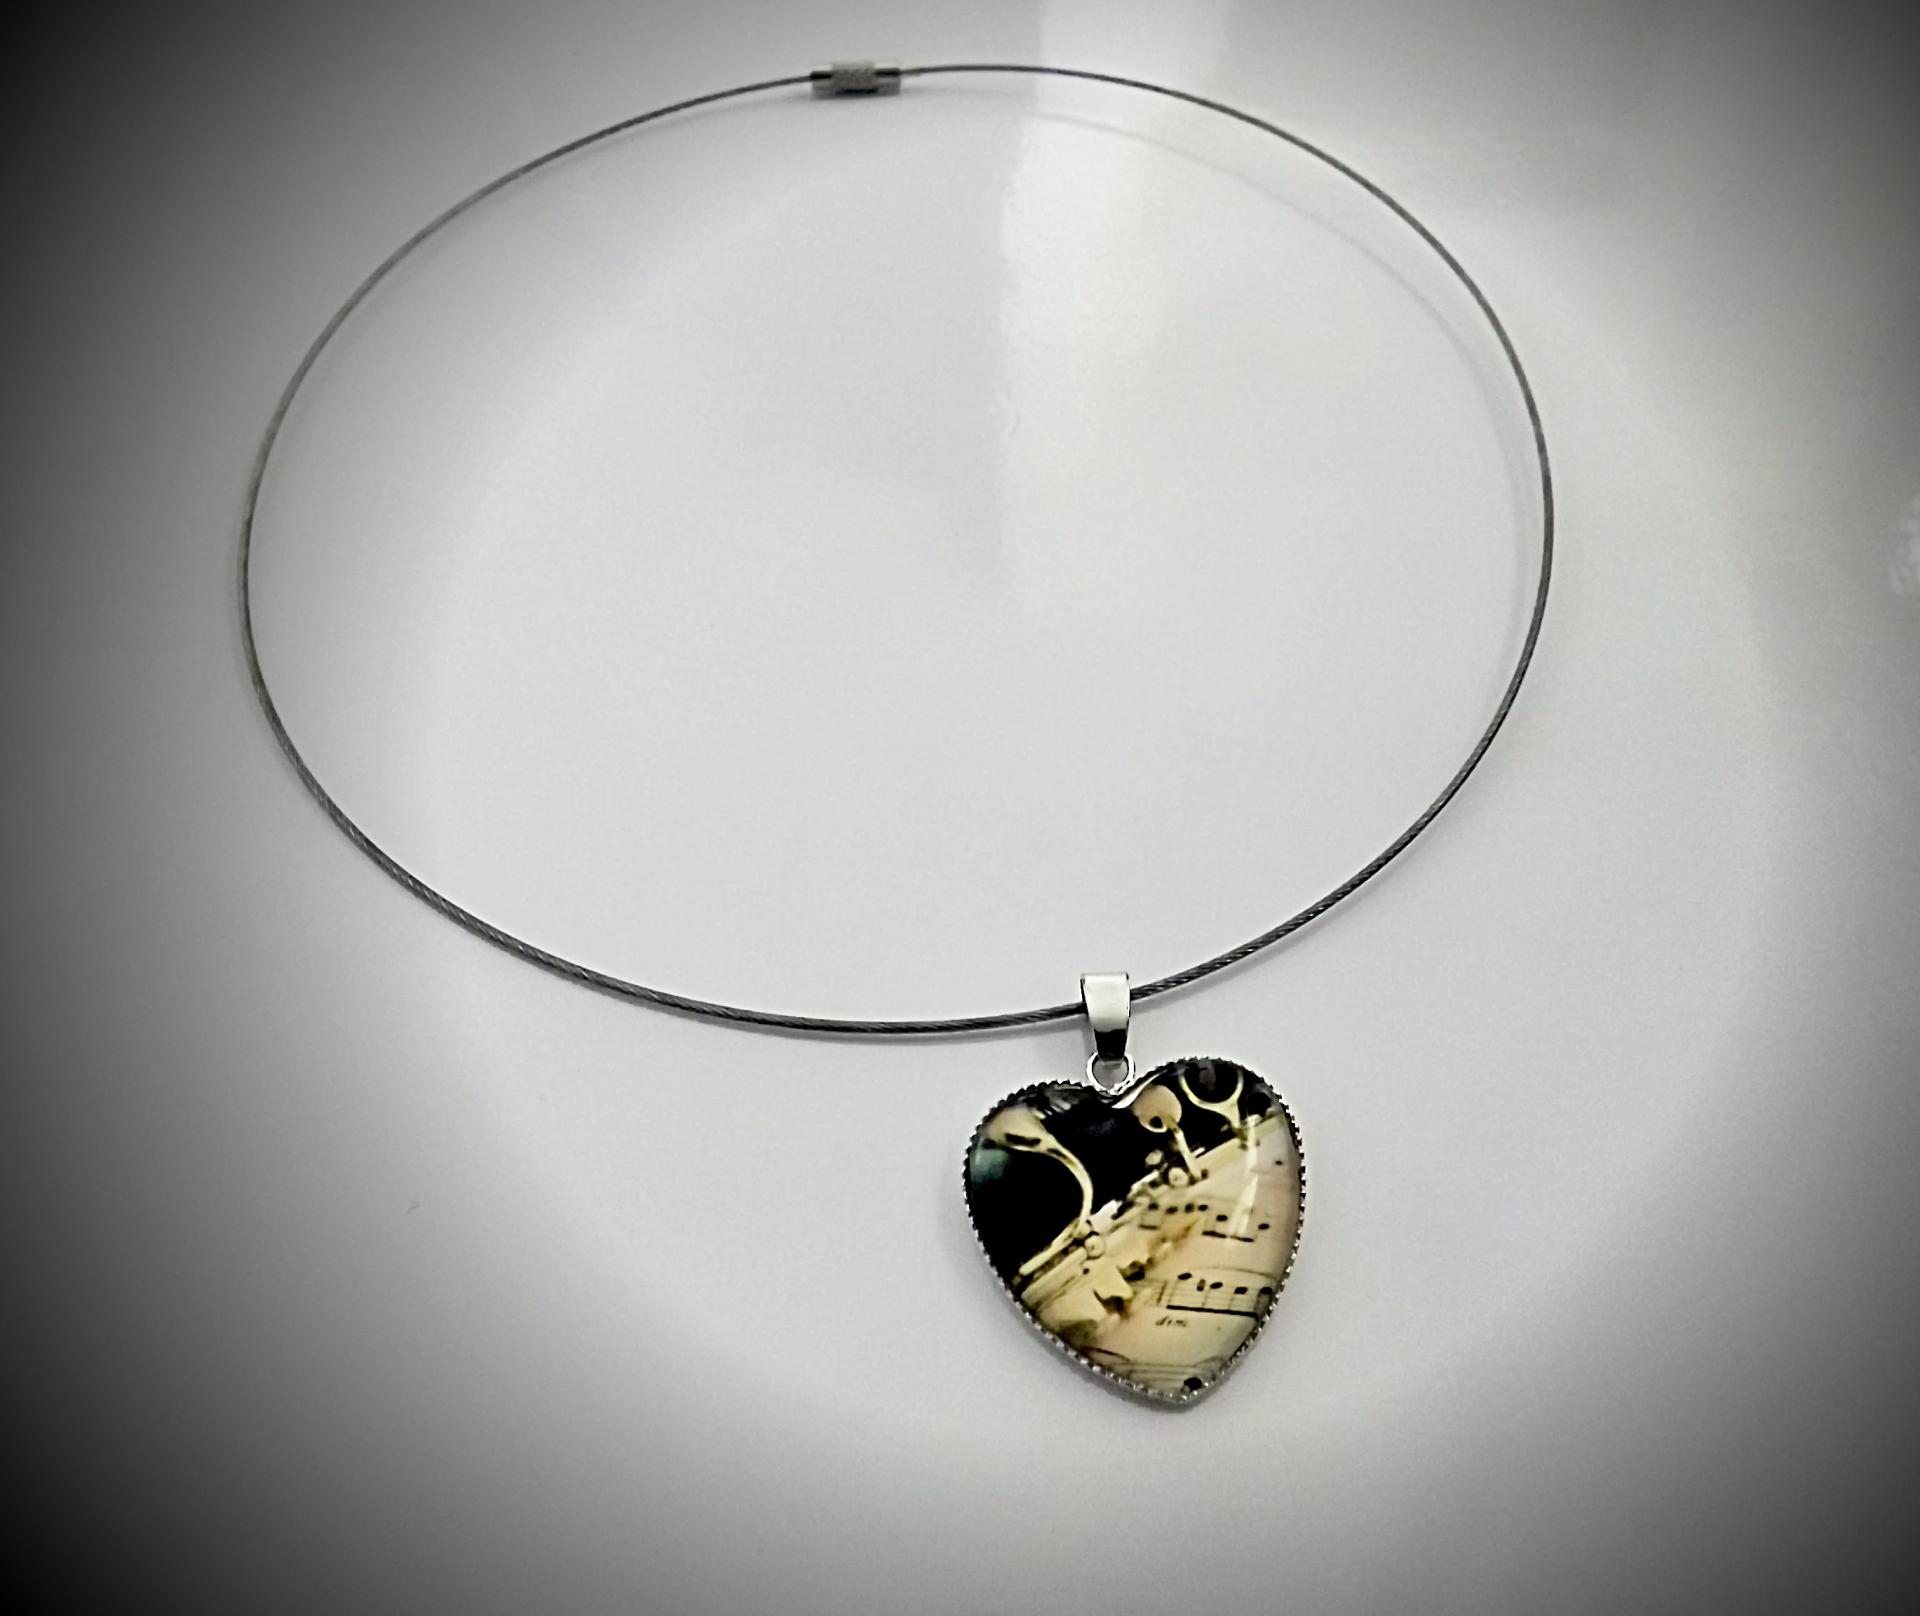 Clarinet Necklace in Heart Shape